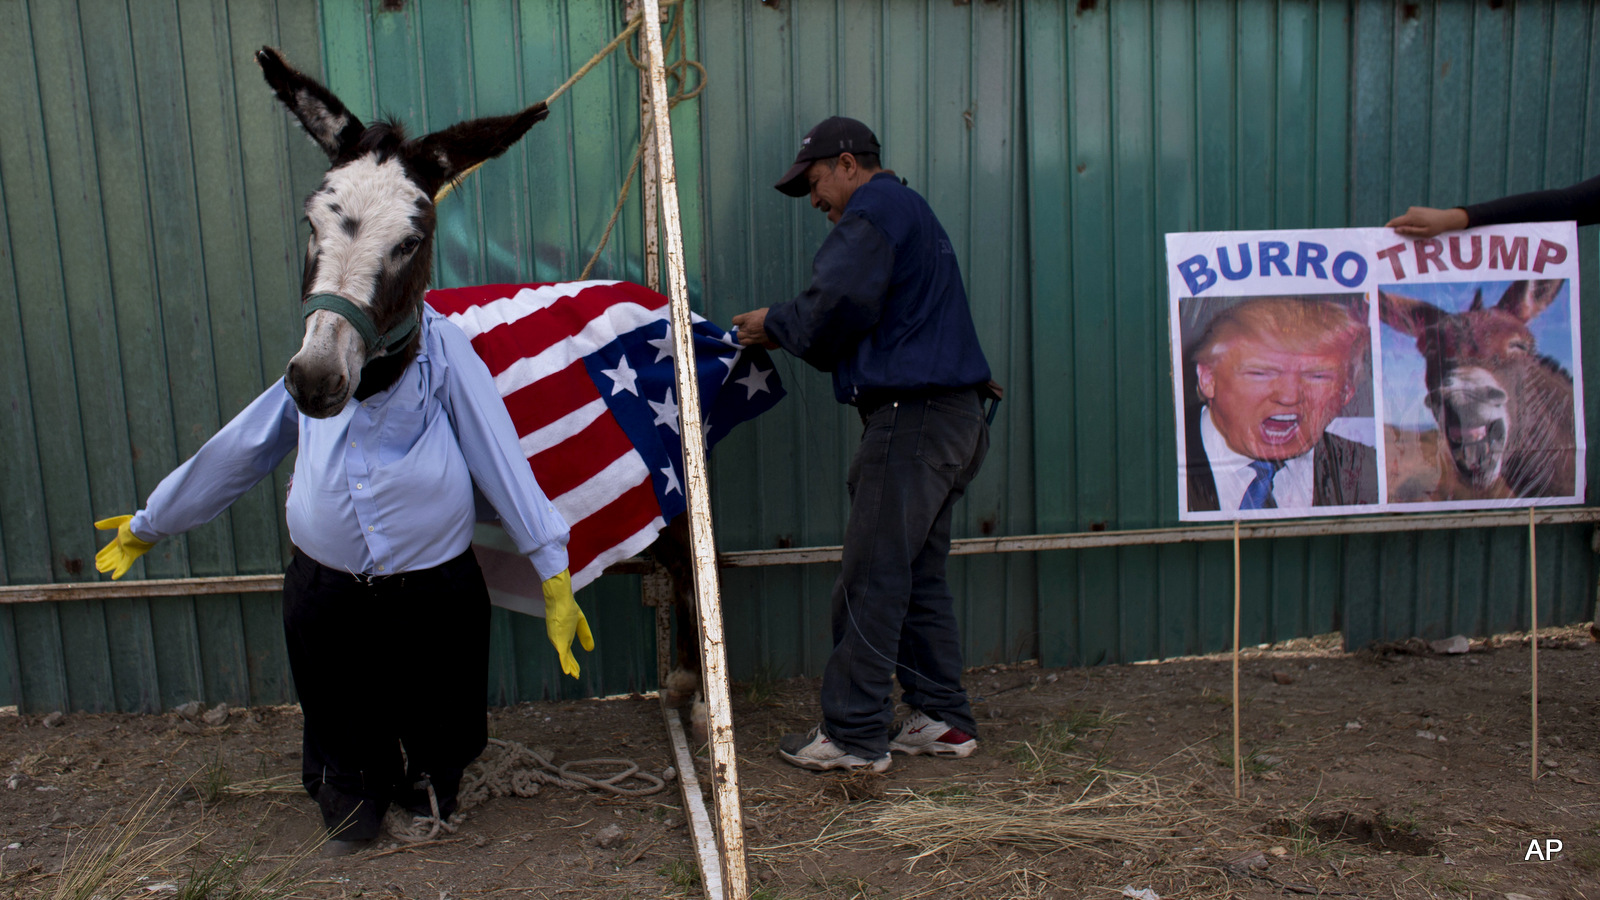 A man dresses a donkey to resemble Donald Trump in preparation for the costume competition at the annual donkey festival in Otumba, Mexico state, Mexico